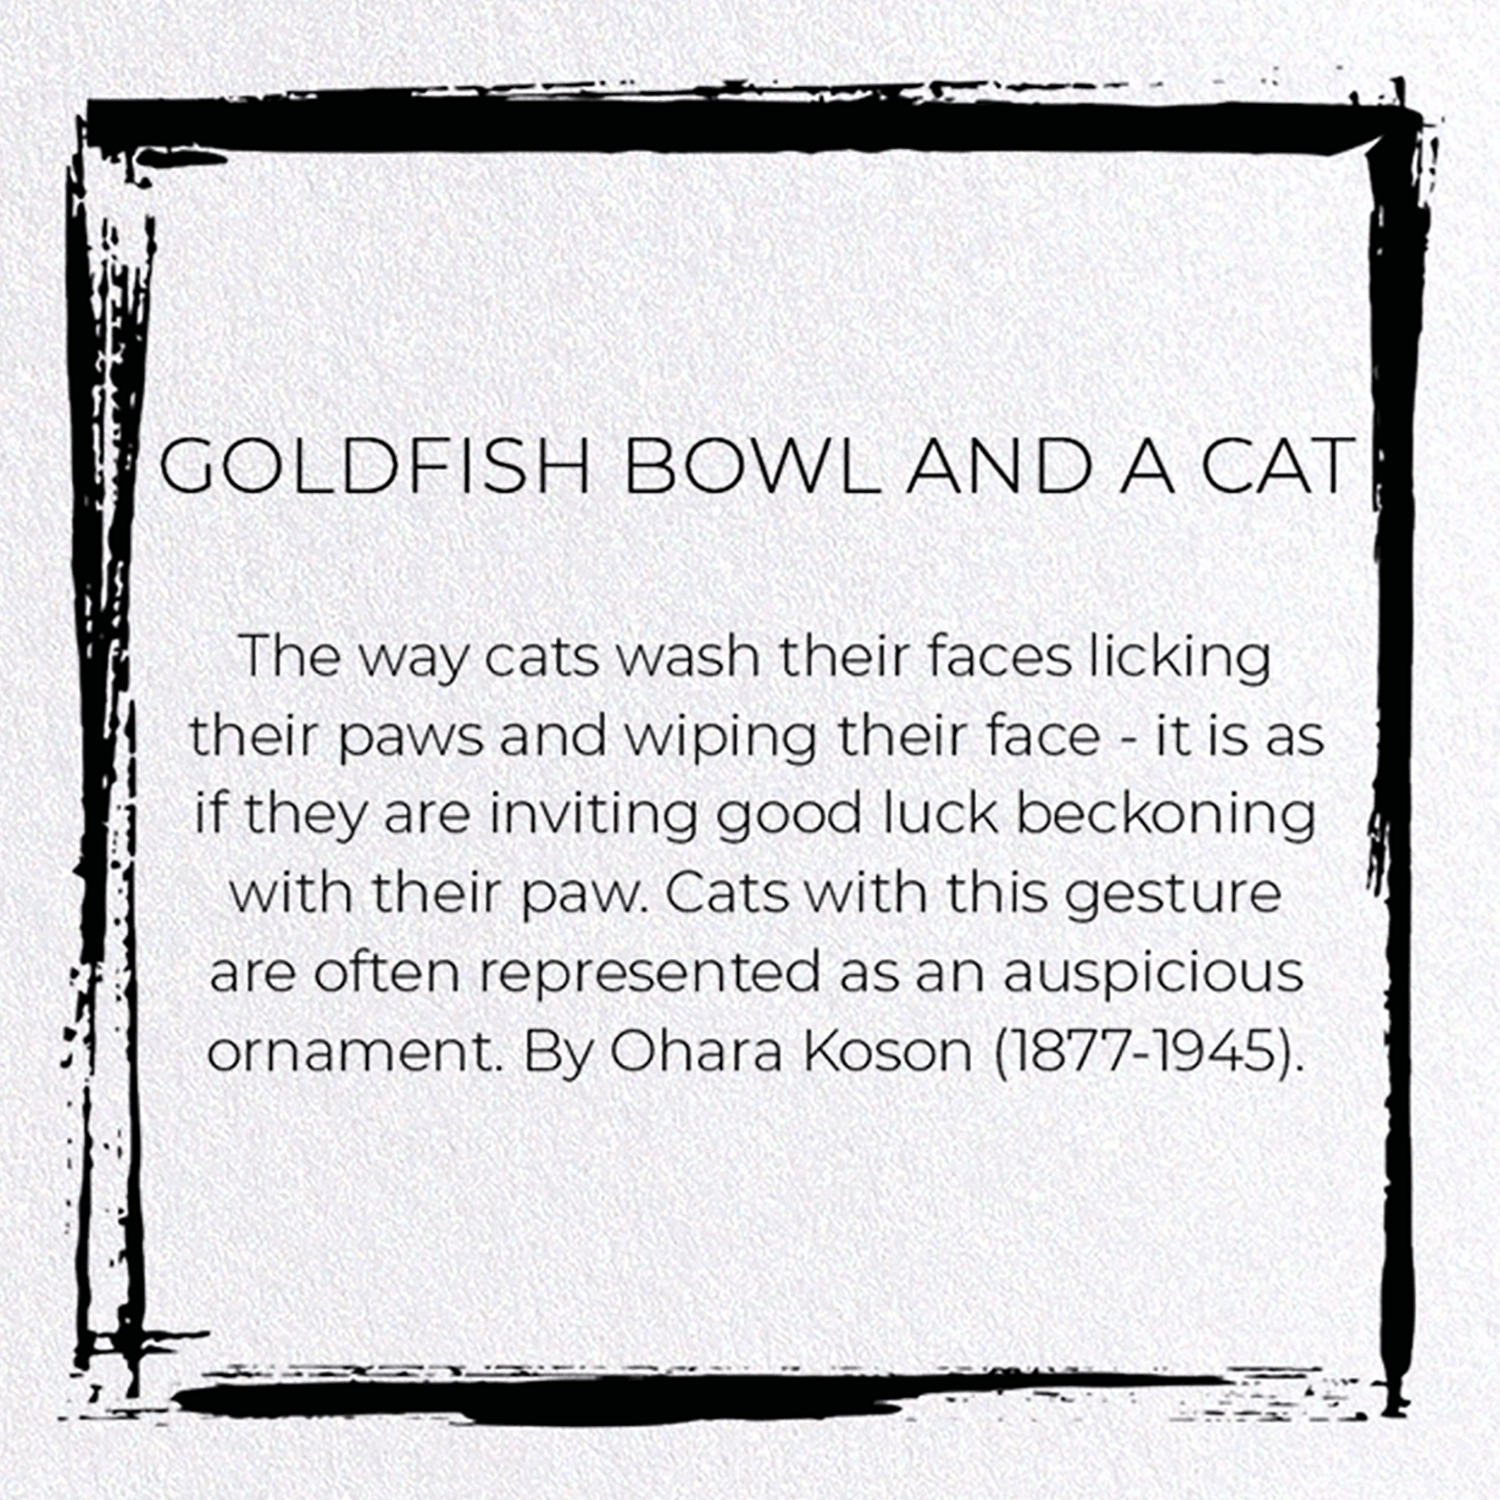 GOLDFISH BOWL AND A CAT: Japanese Greeting Card